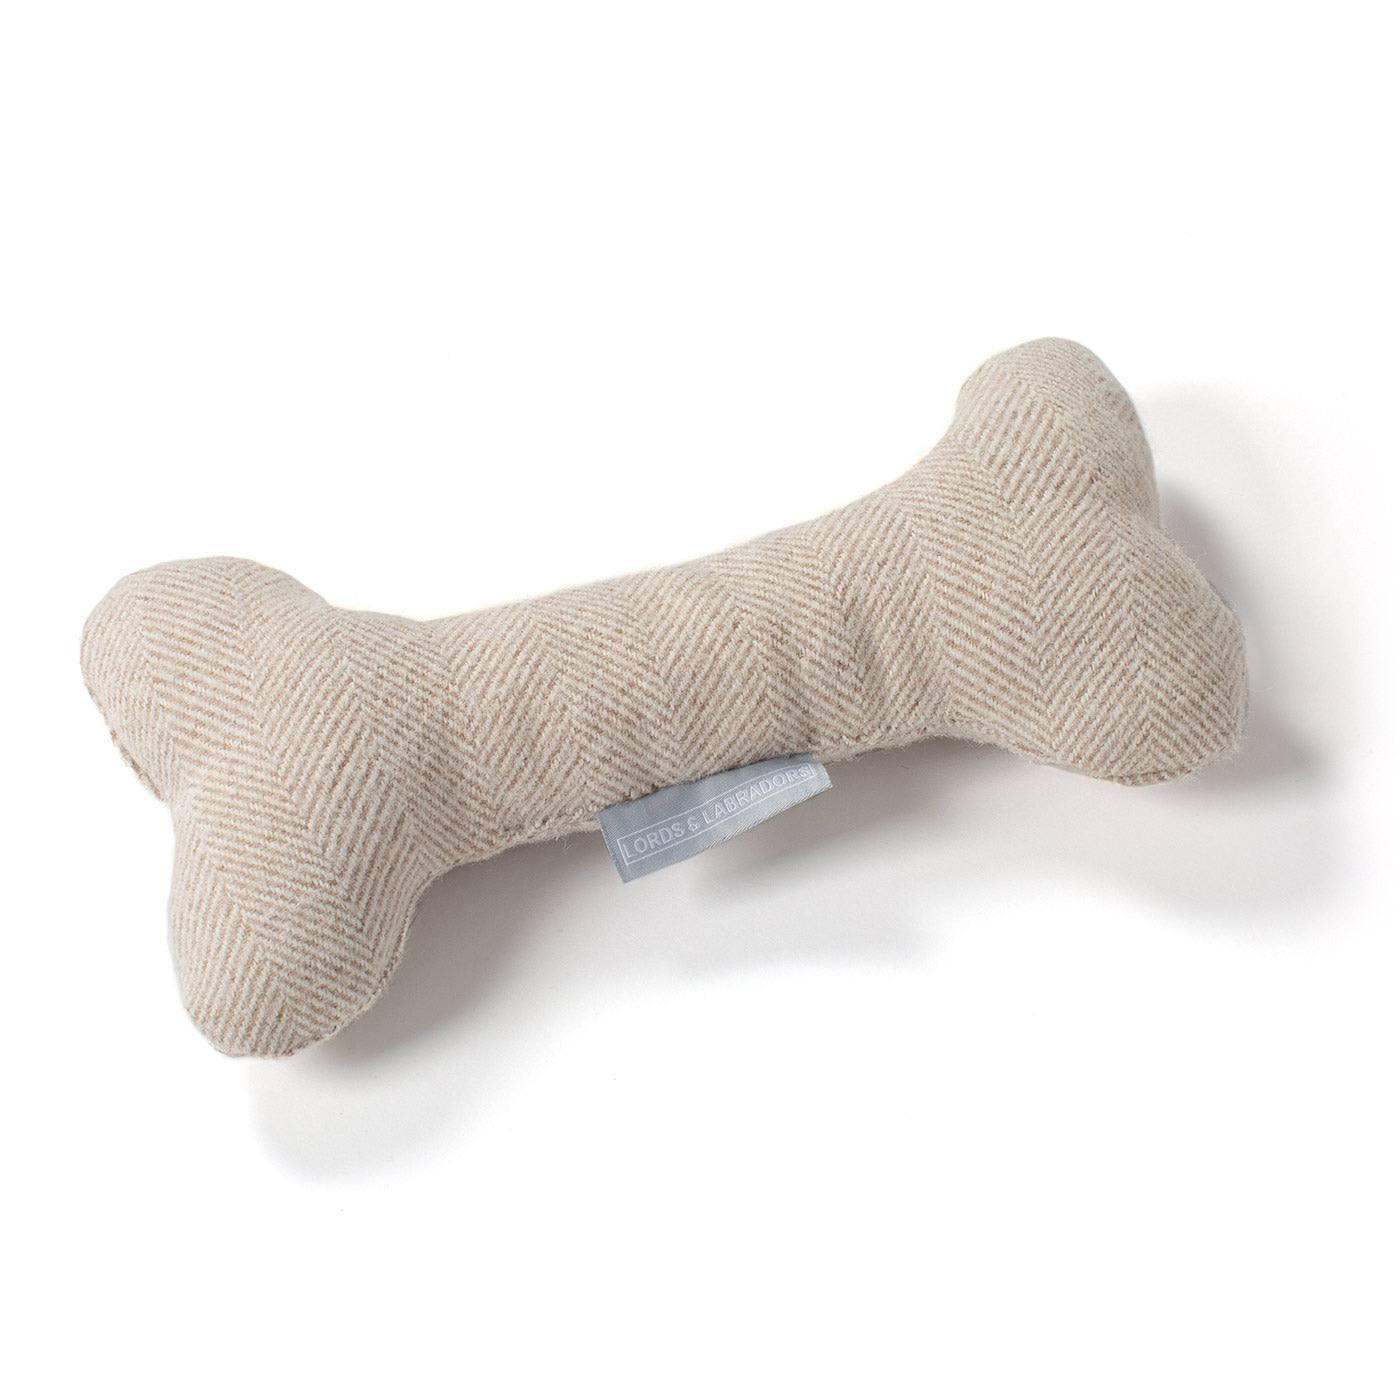 Present The Perfect Pet Playtime With Our Luxury Dog Bone Toy, In Stunning Natural Herringbone Tweed! Available To Personalise Now at Lords & Labradors 